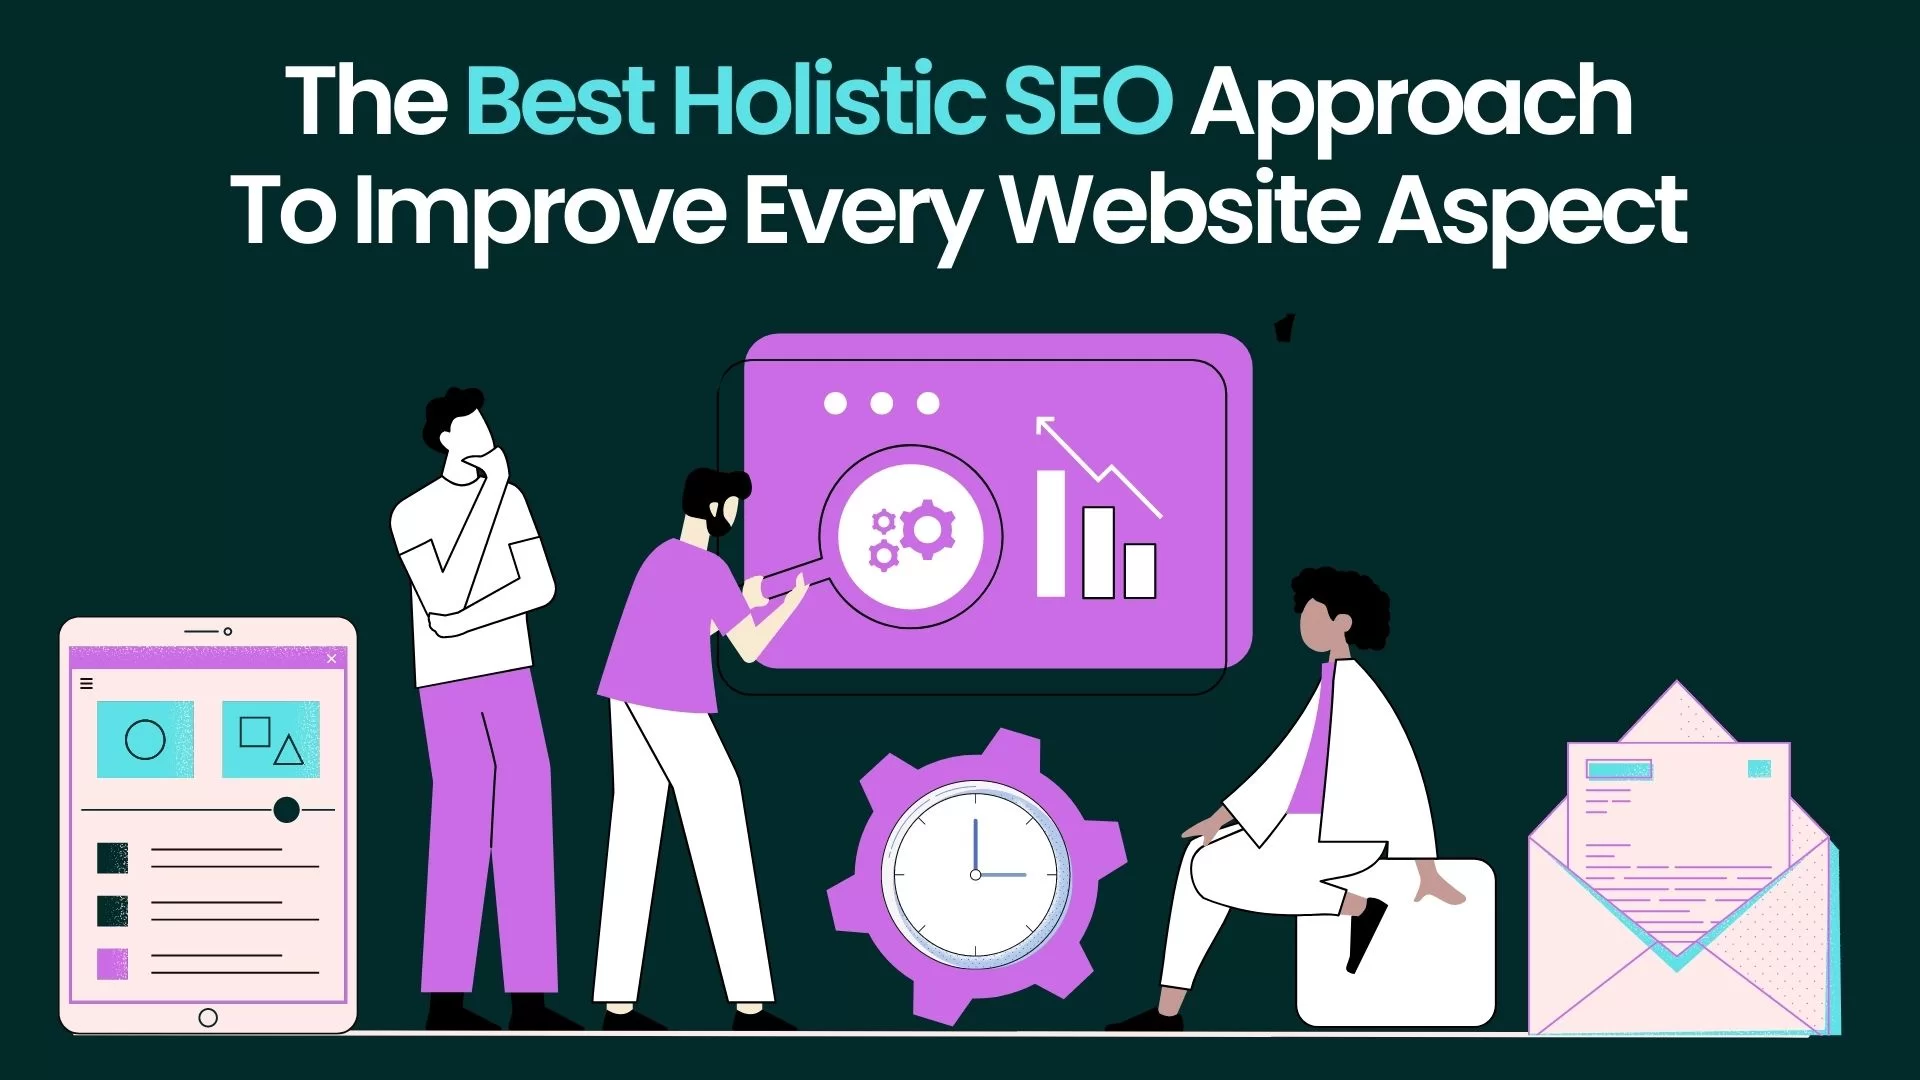 What Is A Holistic SEO Approach?